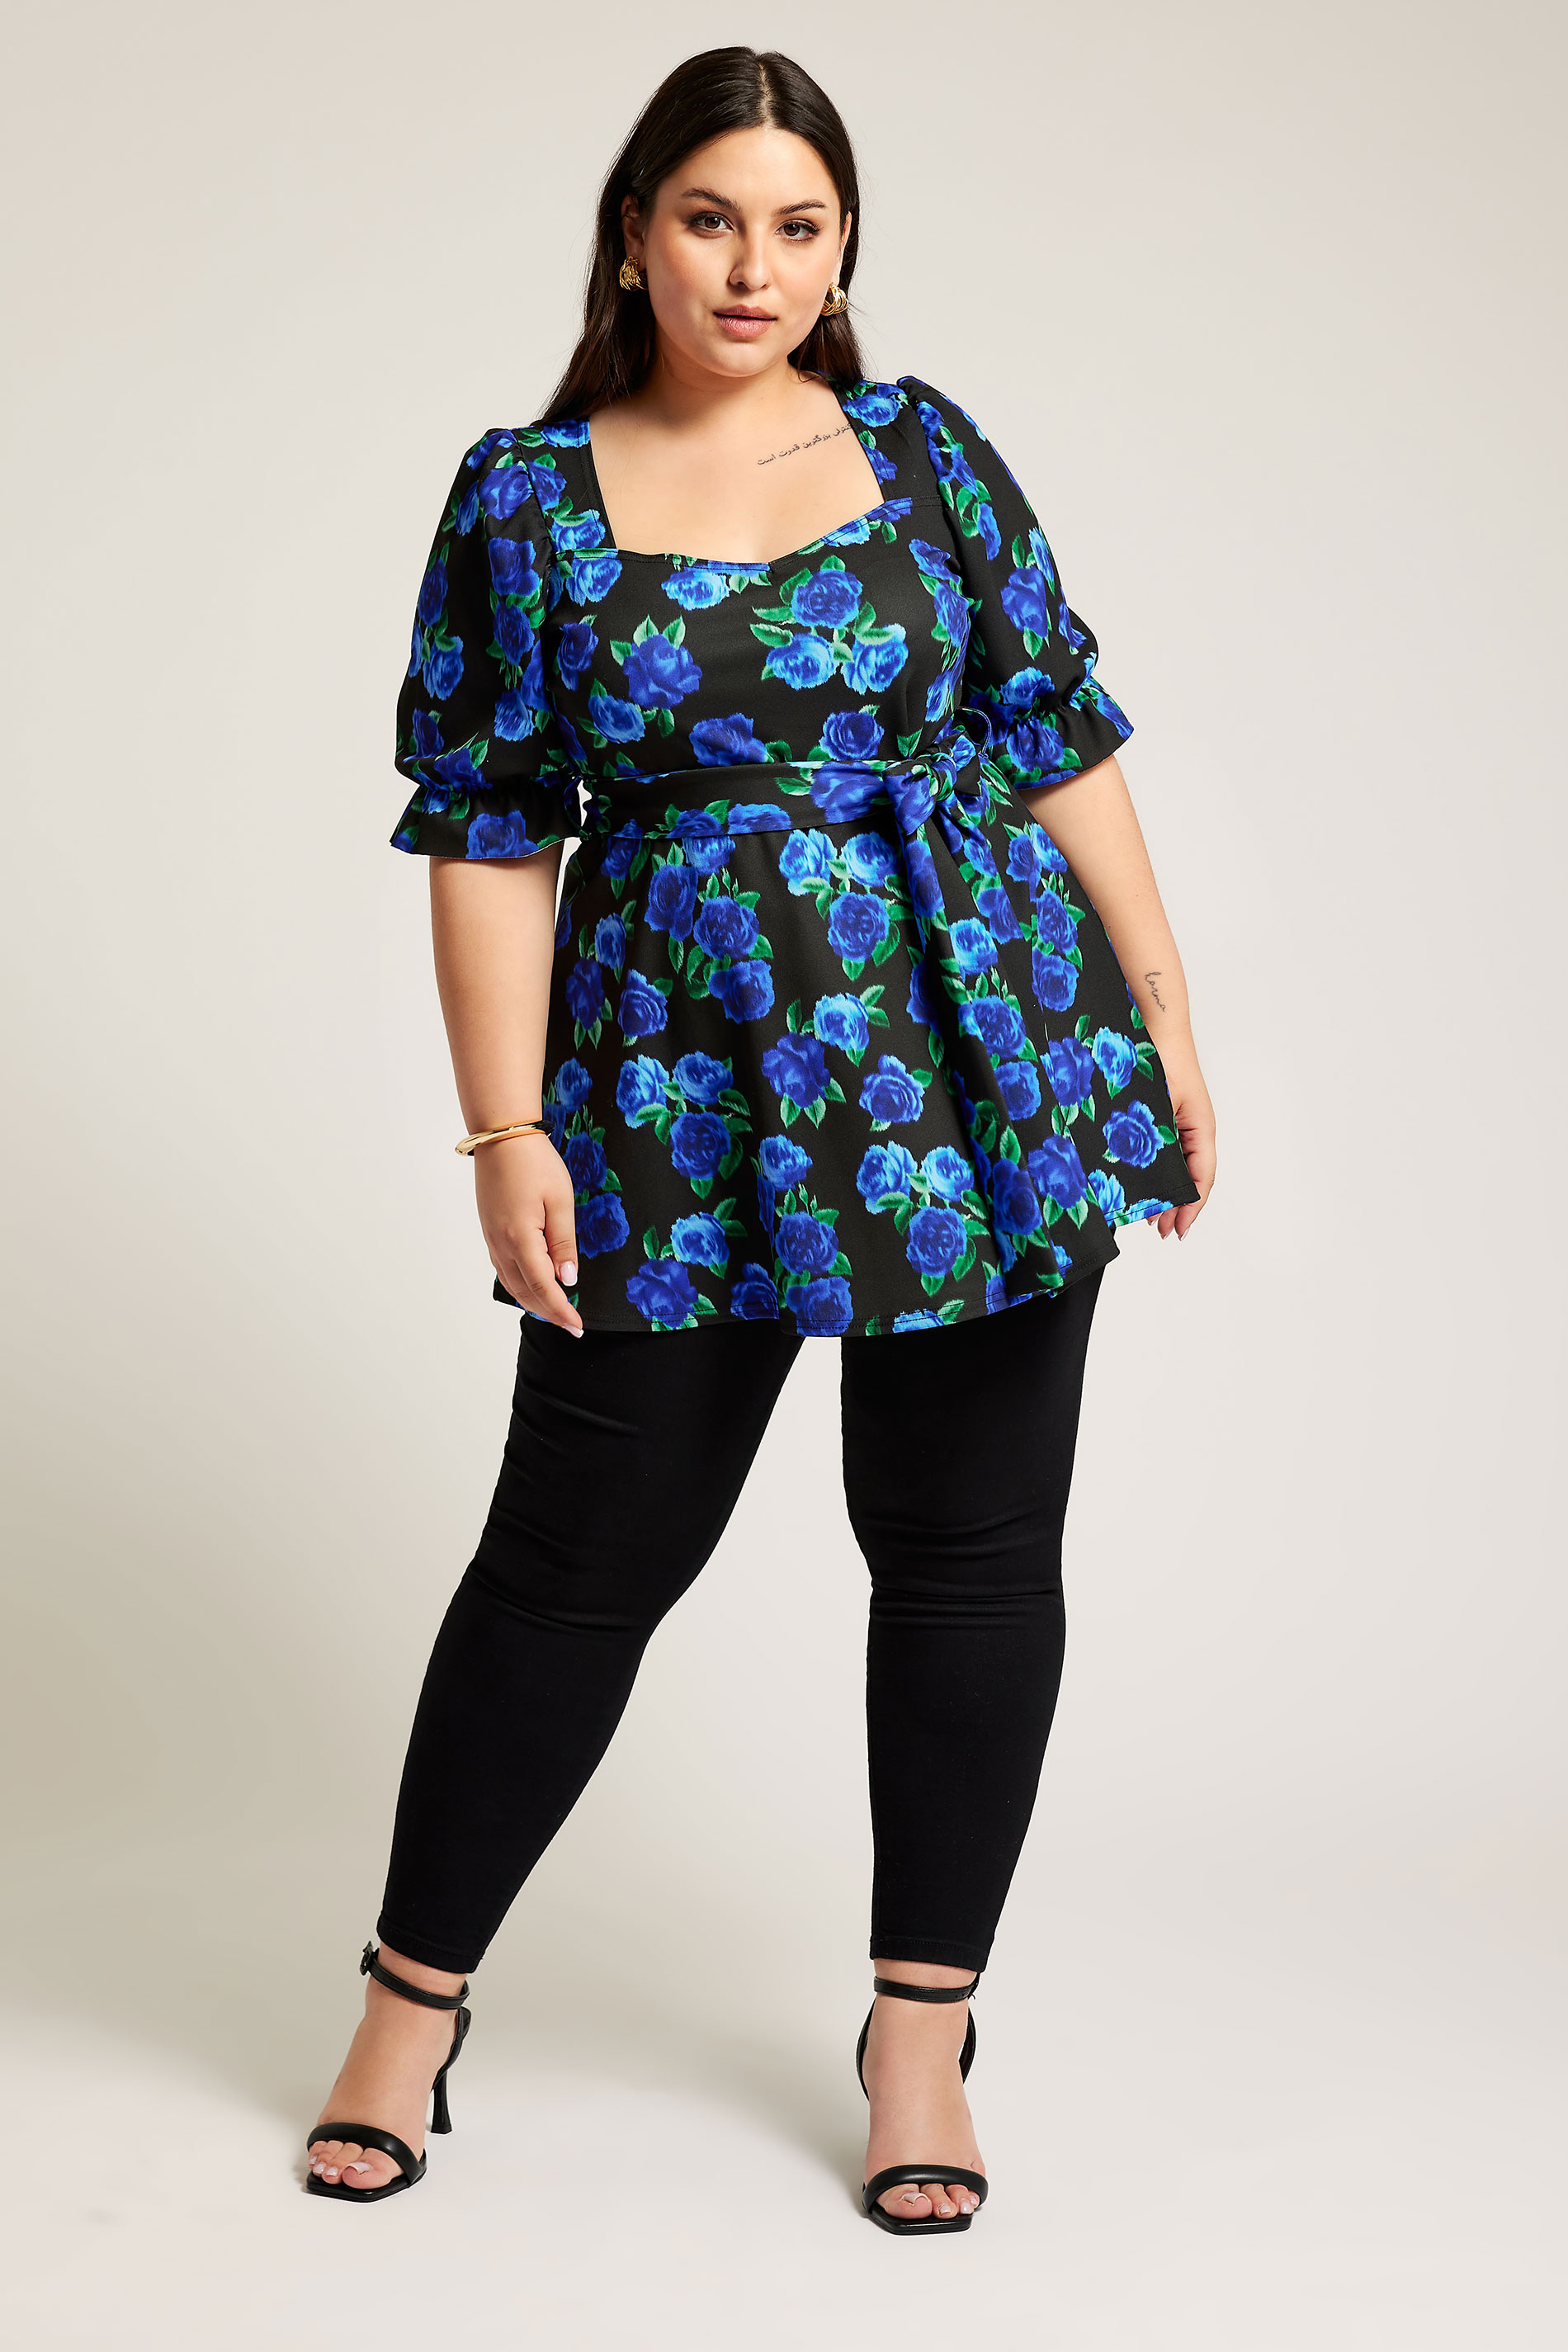 YOURS LONDON Plus Size Black & Blue Floral Print Peplum Top | Yours Clothing 2